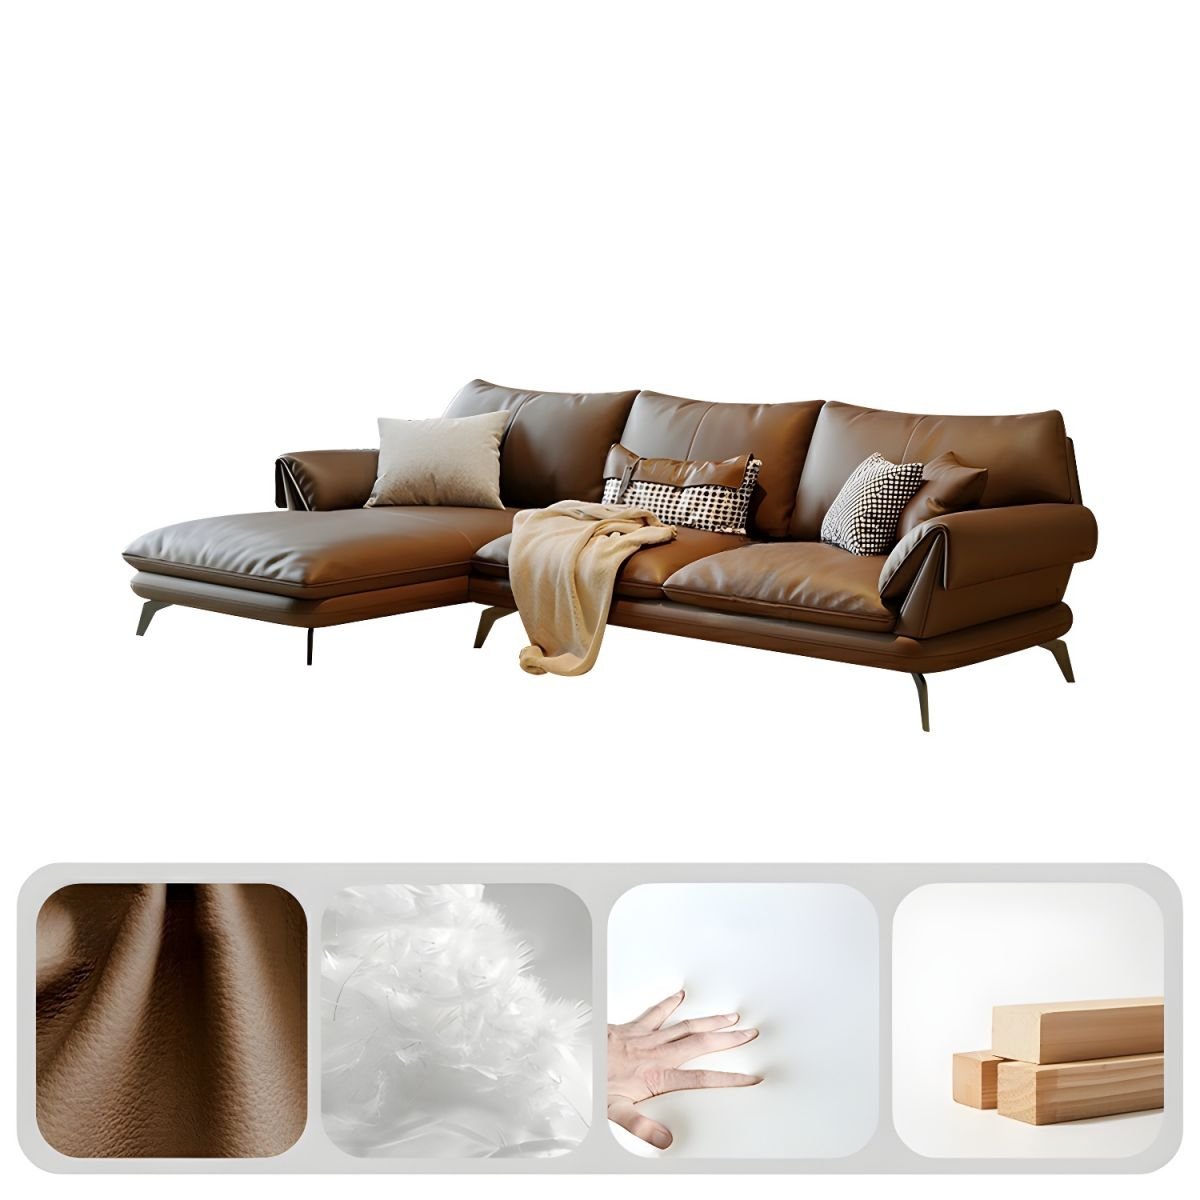 Genuine Leather L-Shaped Sectional Sofa in Brown with Pillows - 110"L x 69"W x 34"H Full Grain Cow Leather